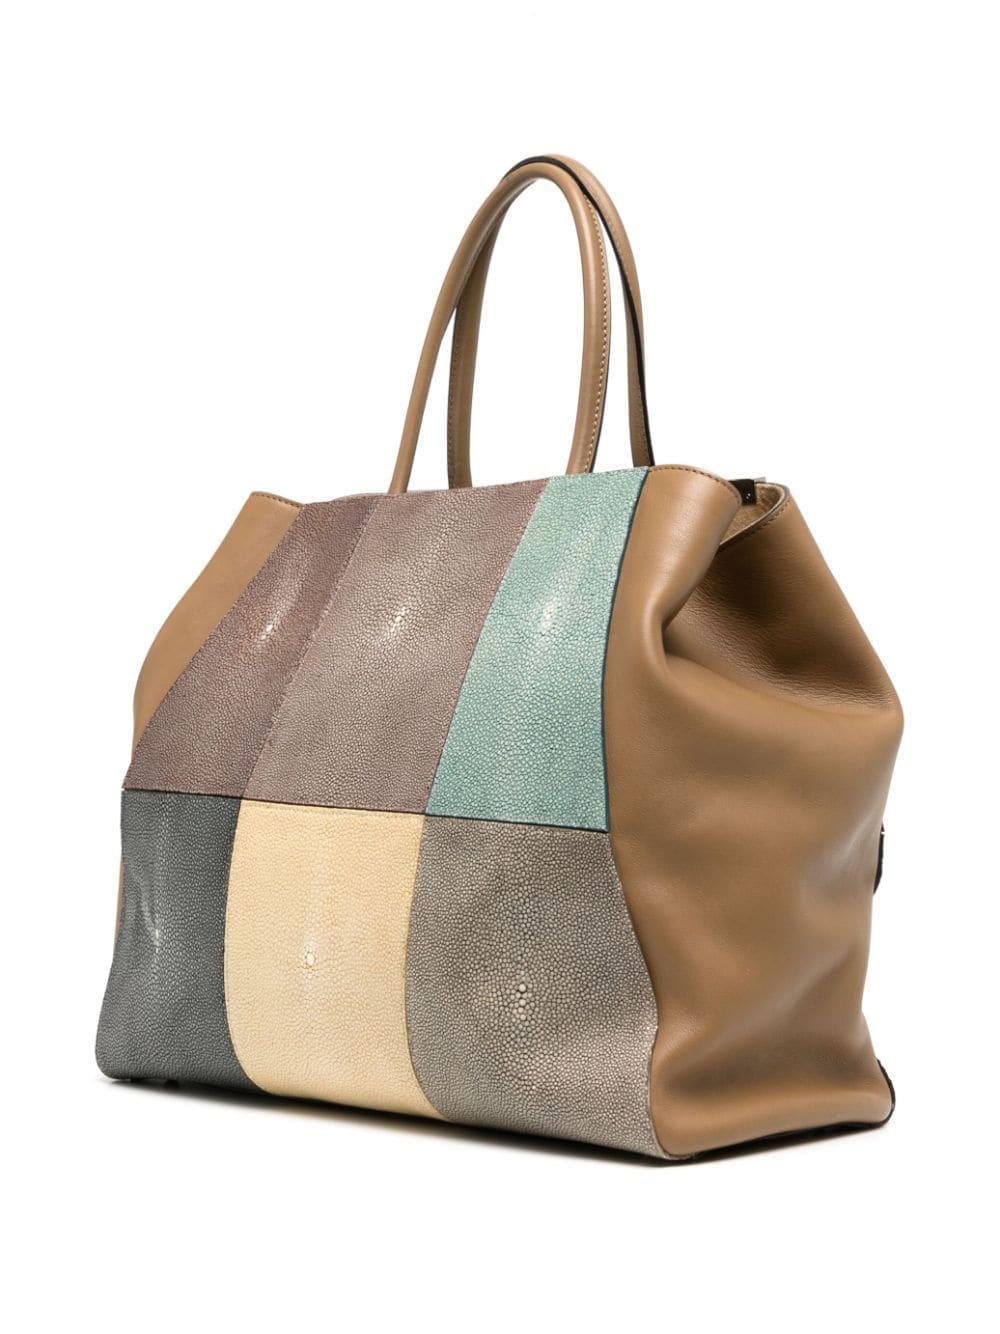 Rectangular body Fendi Tote bag expertly crafted in Italy with 100% leather in camel brown and multicolour with a patchwork design made of leather patchwork. Featuring two rolled top handles, magnetic fastening and an internal zip-fastening pocket.